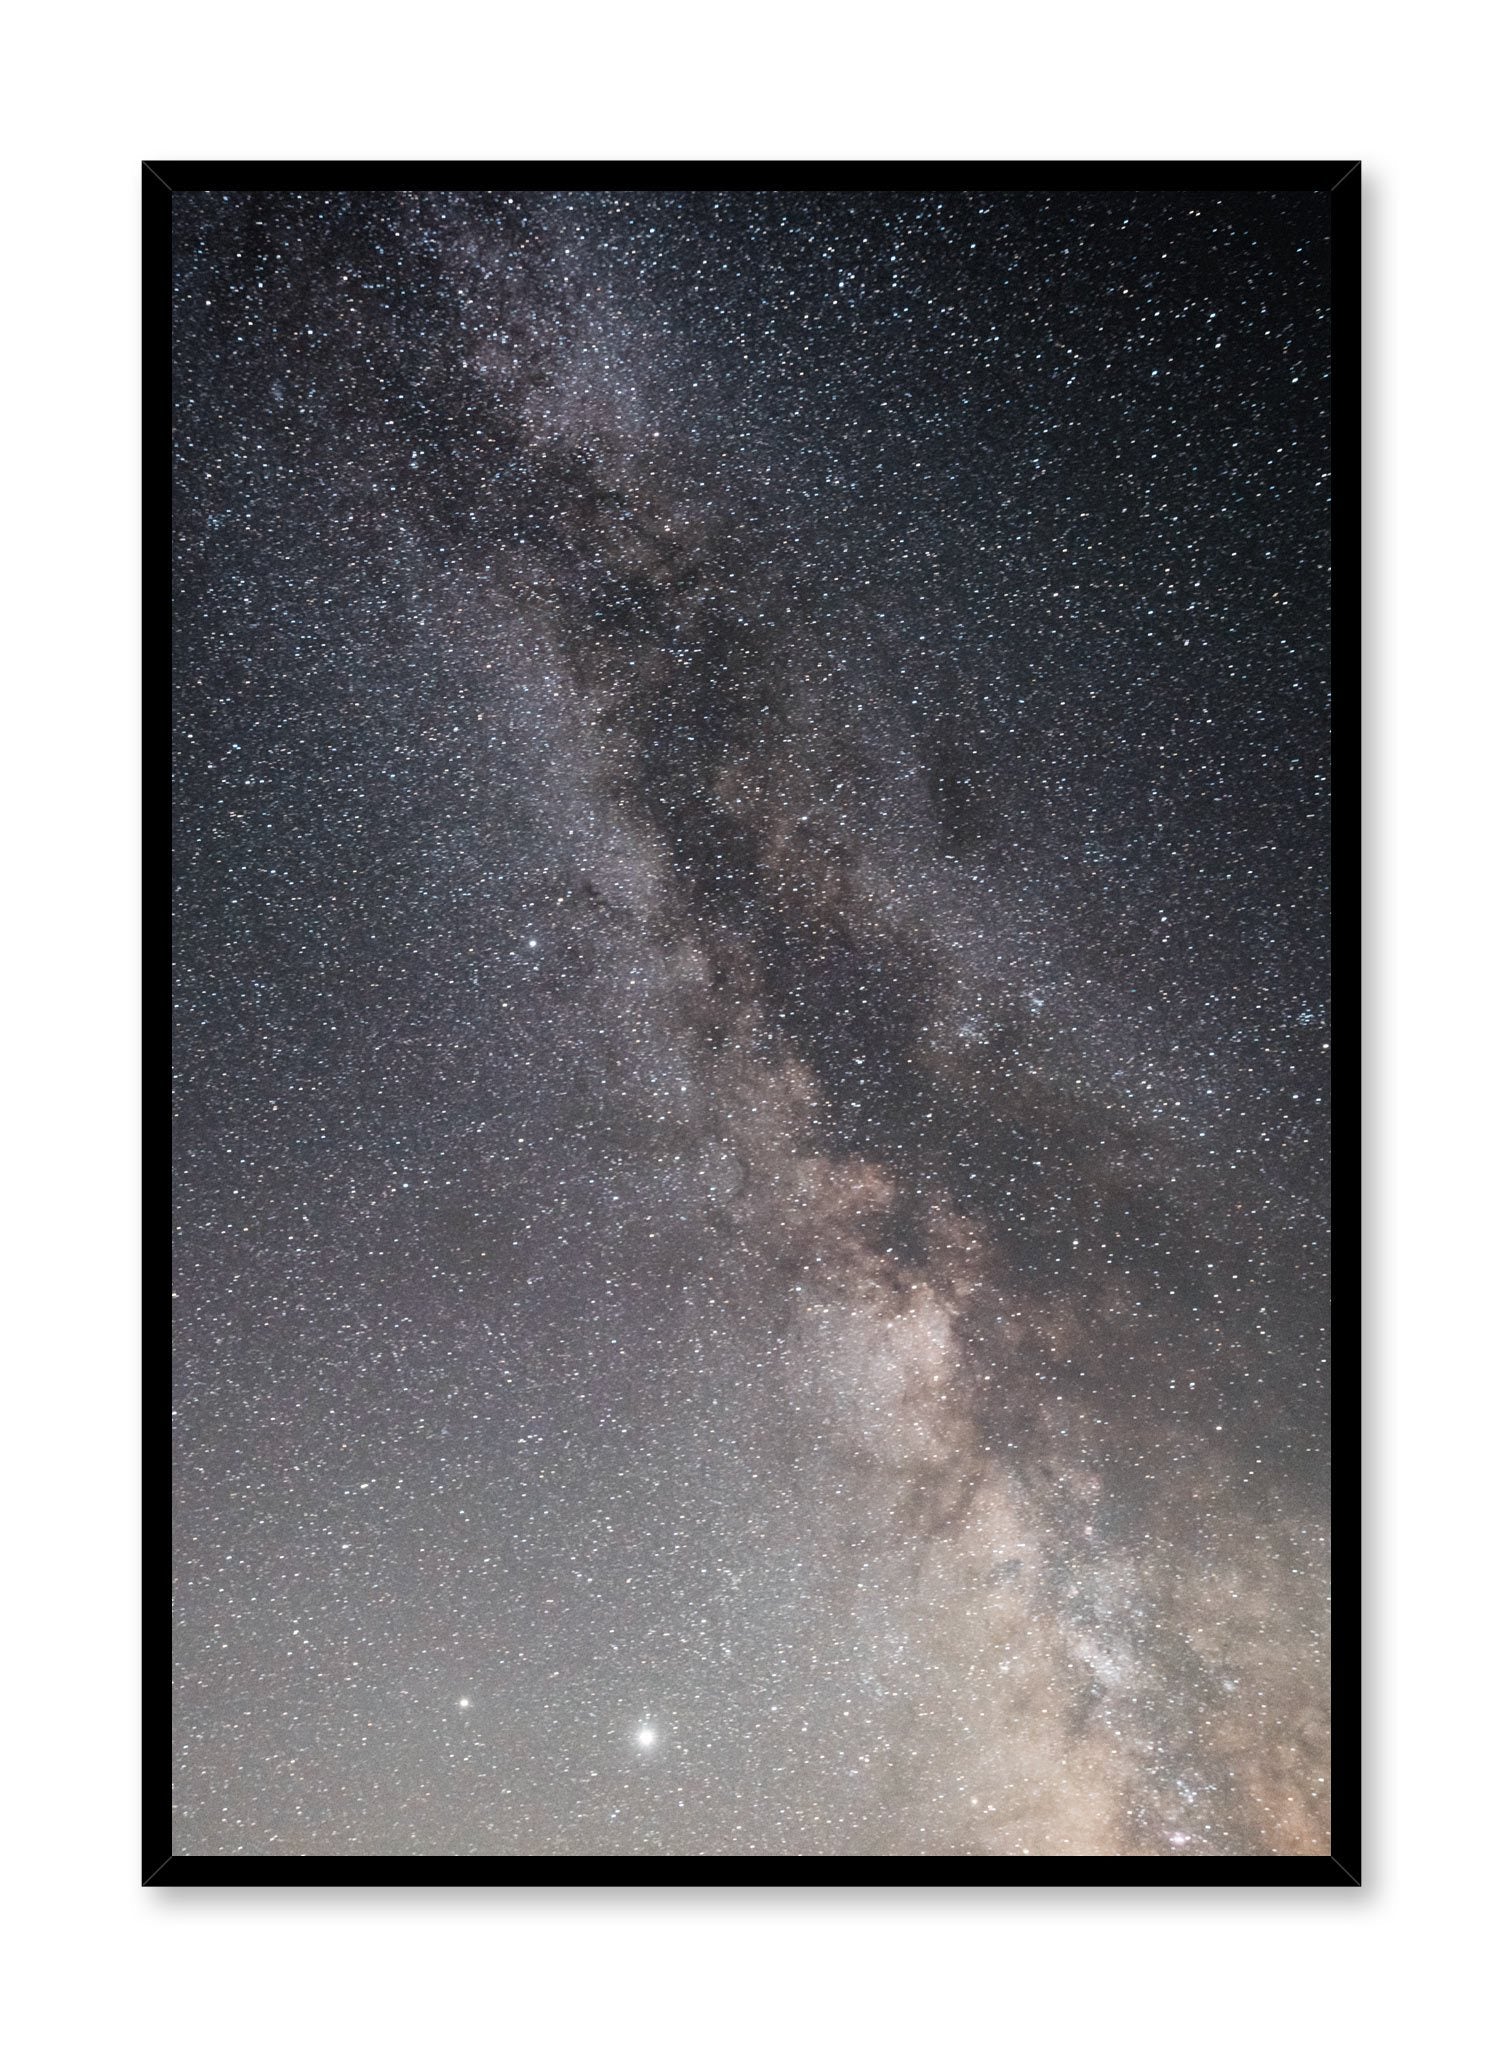 Celestial photography poster by Opposite Wall with Milky Way Galaxy